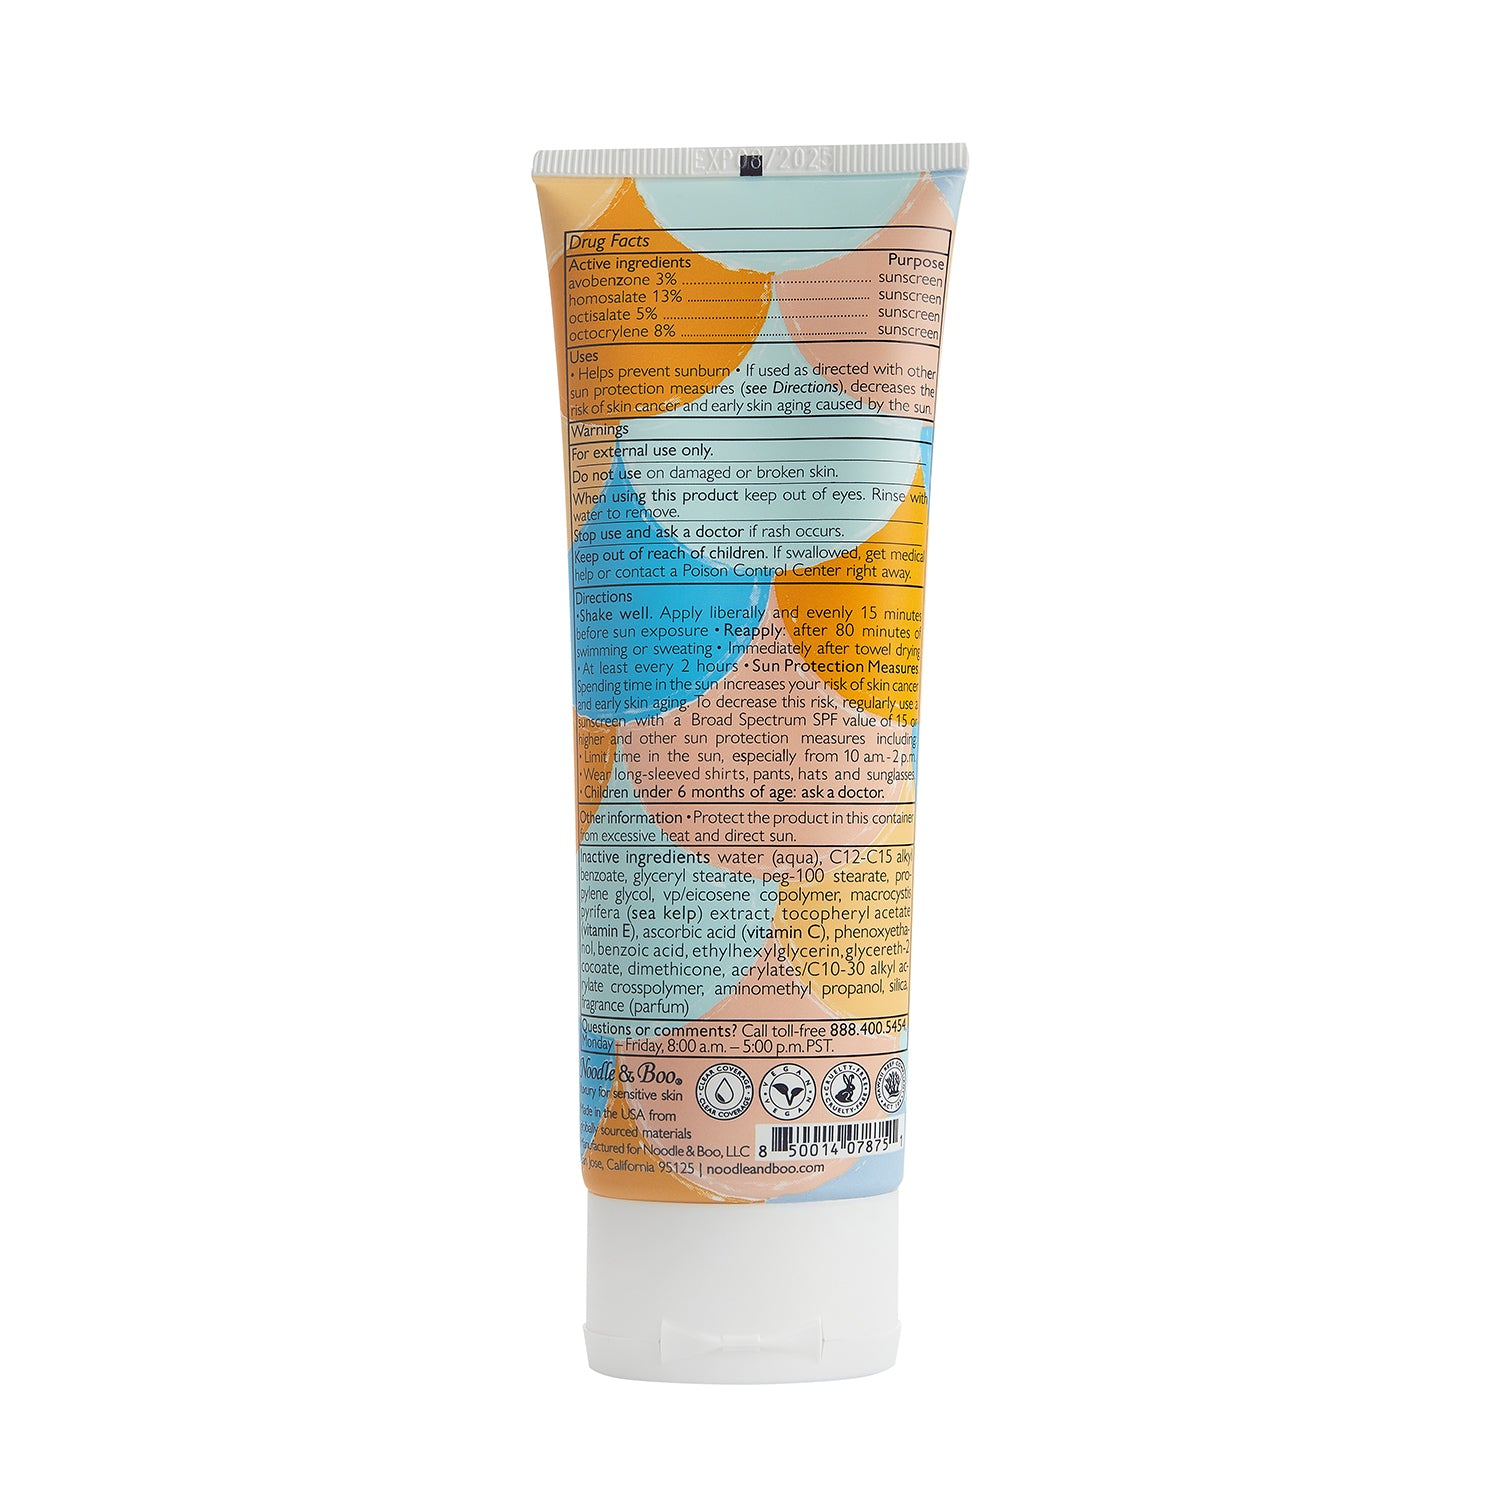 Backside of the tube for Hydrating Sunscreen Lotion Broad Spectrum SPF 30 